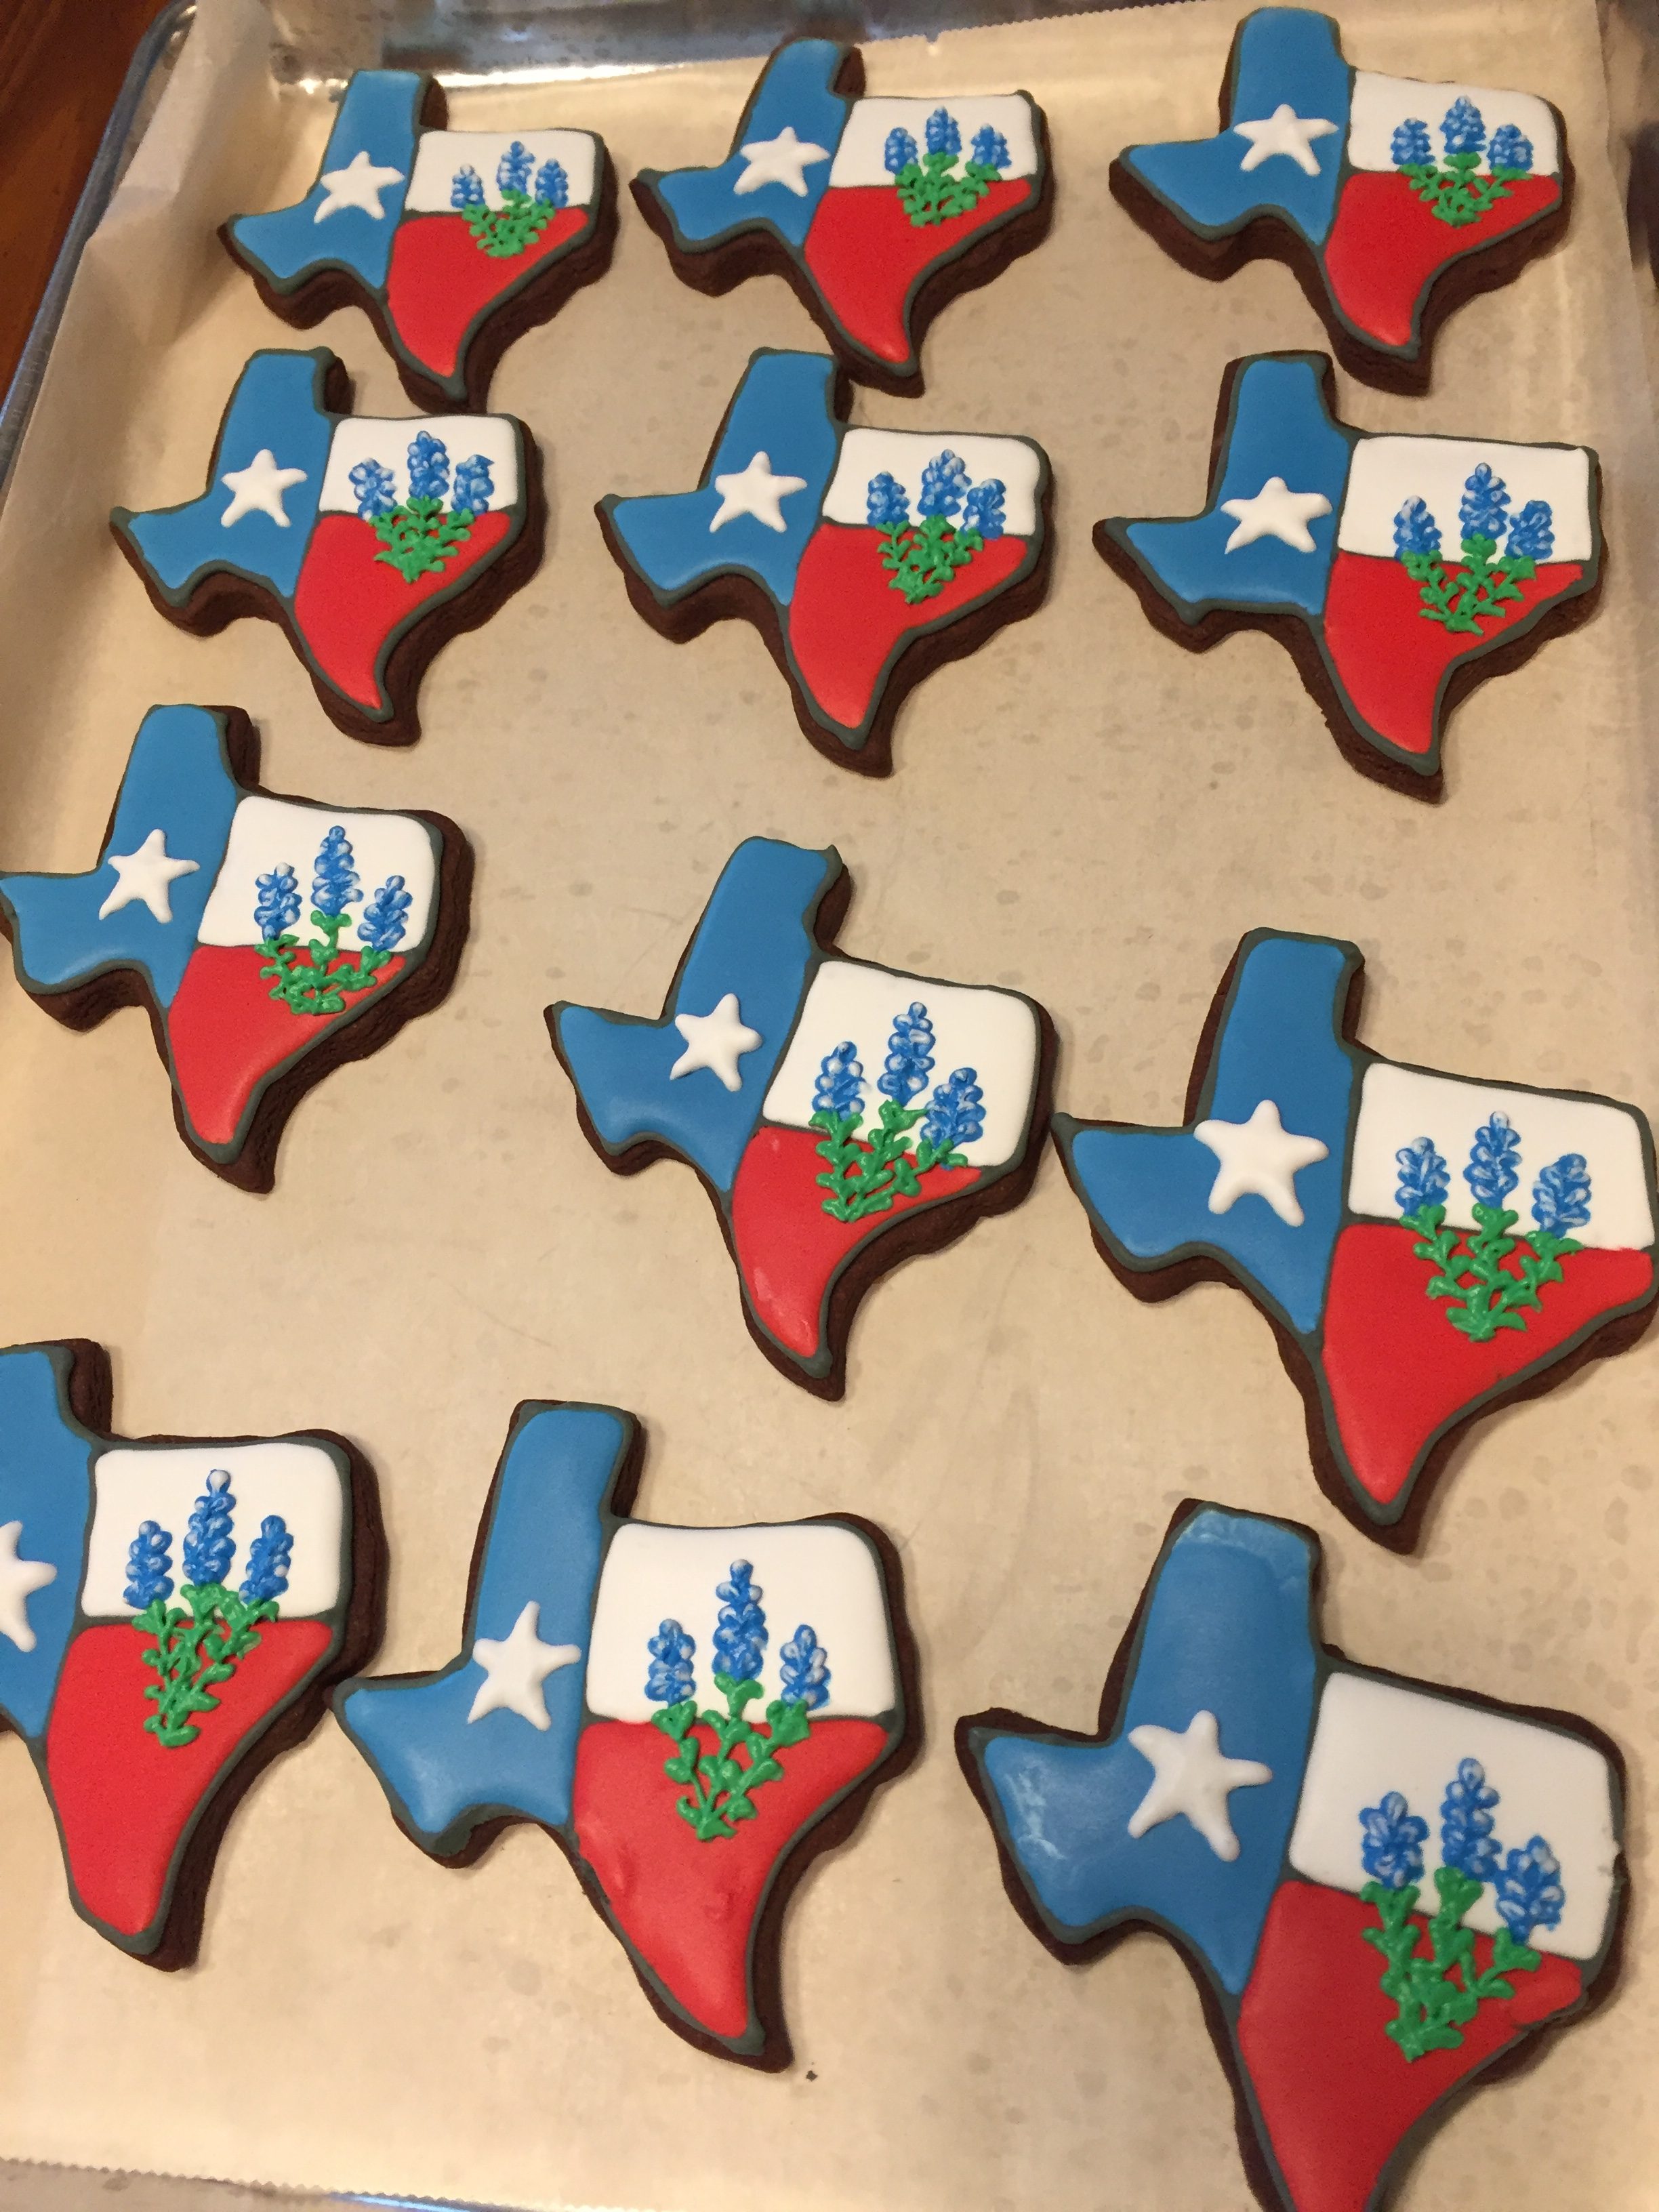 Texas Cookies with Bluebonnets